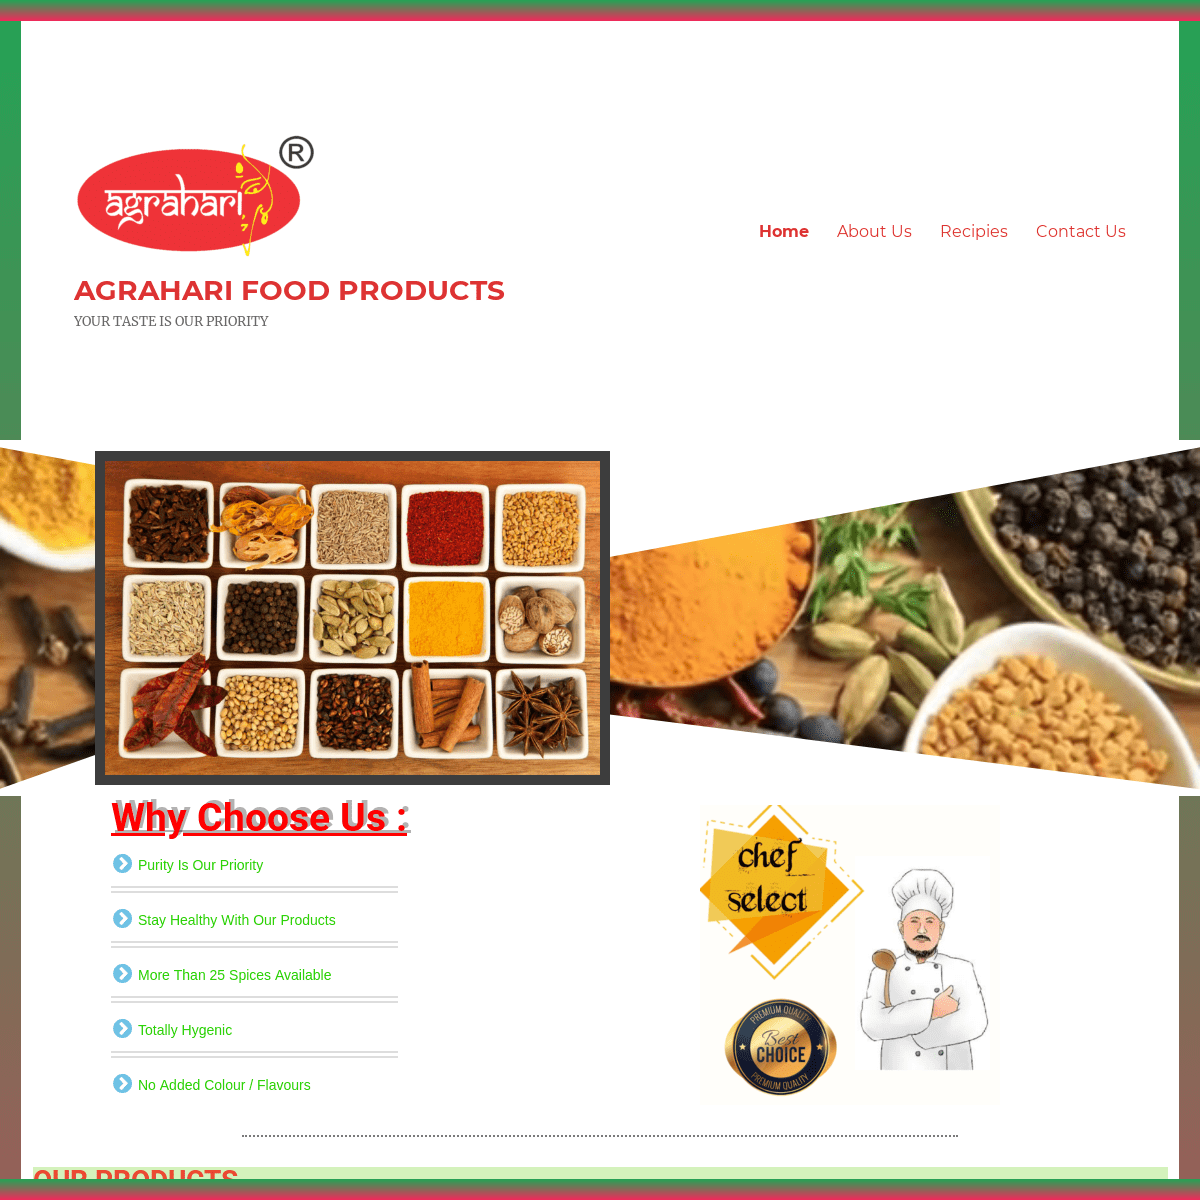 A complete backup of agraharifoodproducts.com